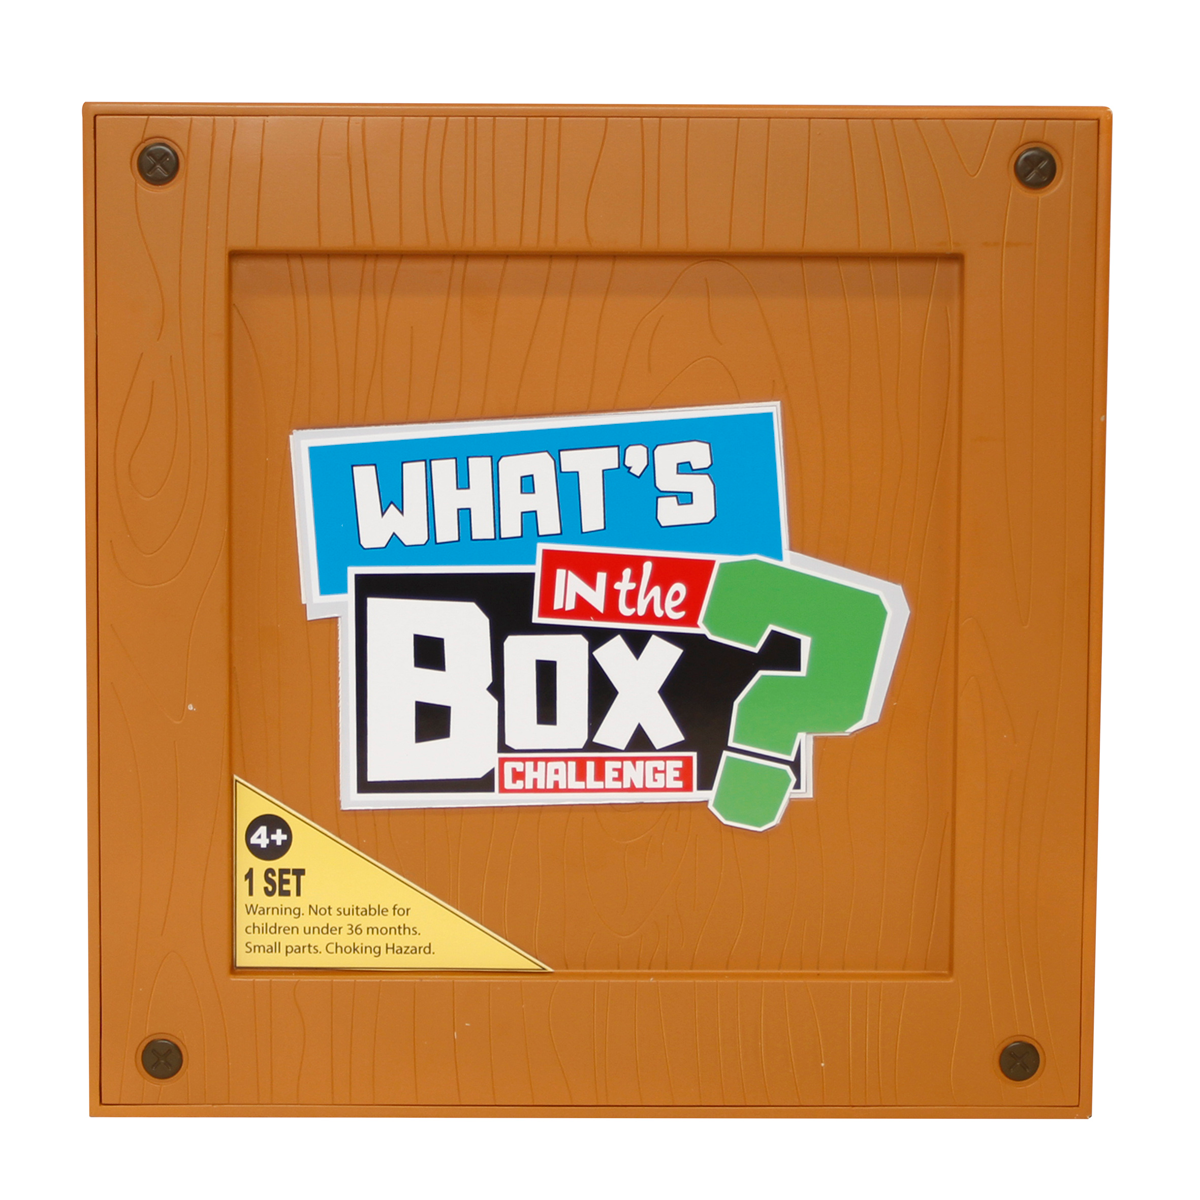 Whats In the Box Challenge Family & Friends Fun Game Set with Timer BRAND NEW